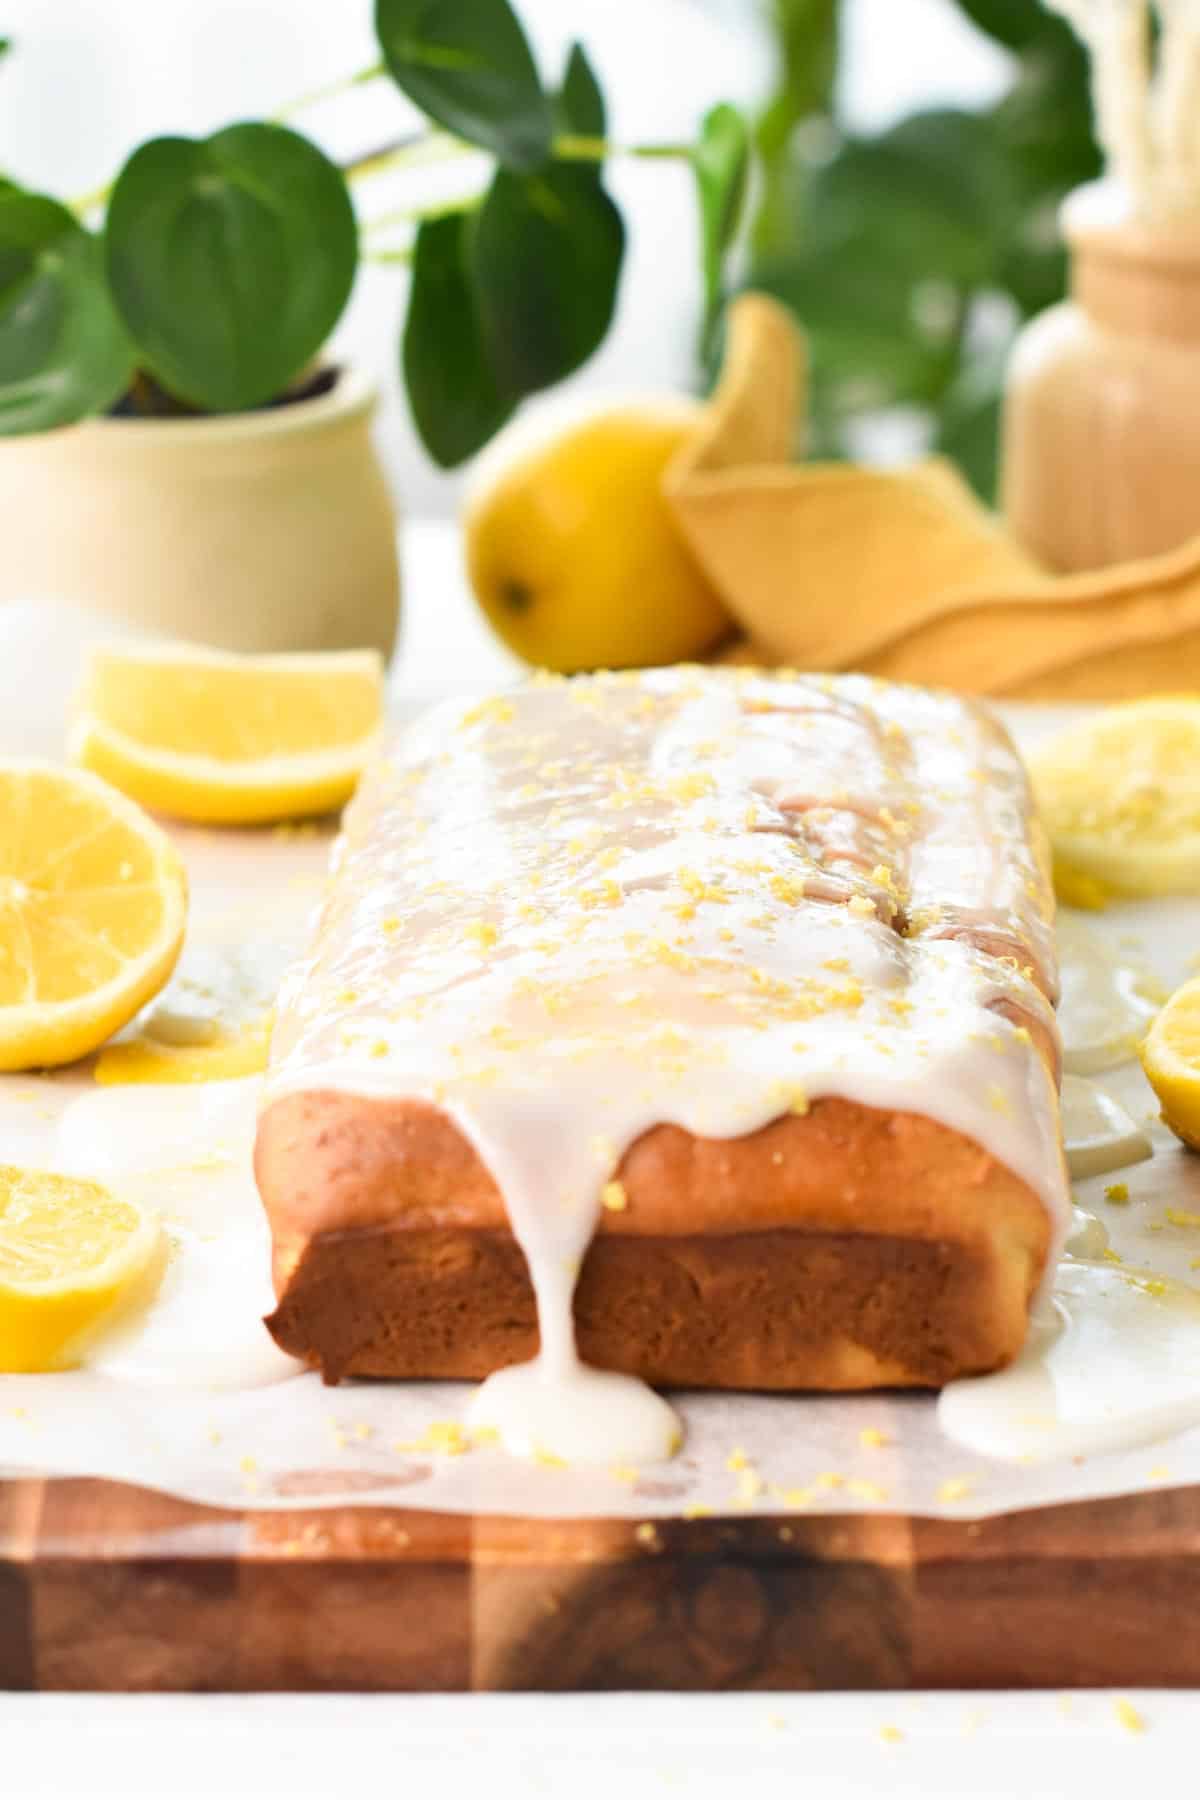 A glaze lemon pound cake on a chopping board with lemons and green plants in the background.